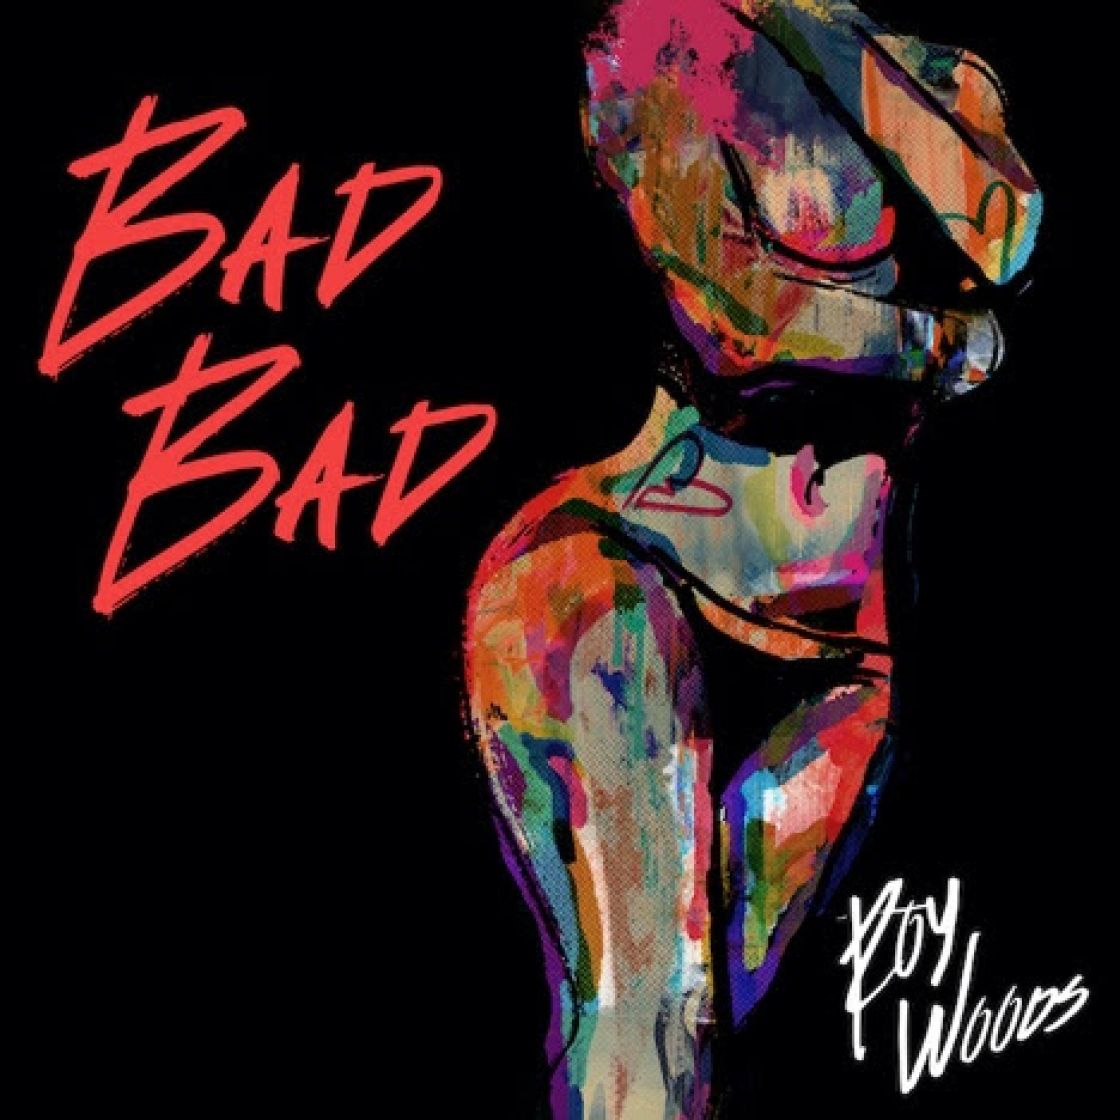 Bad Bad by Roy Woods